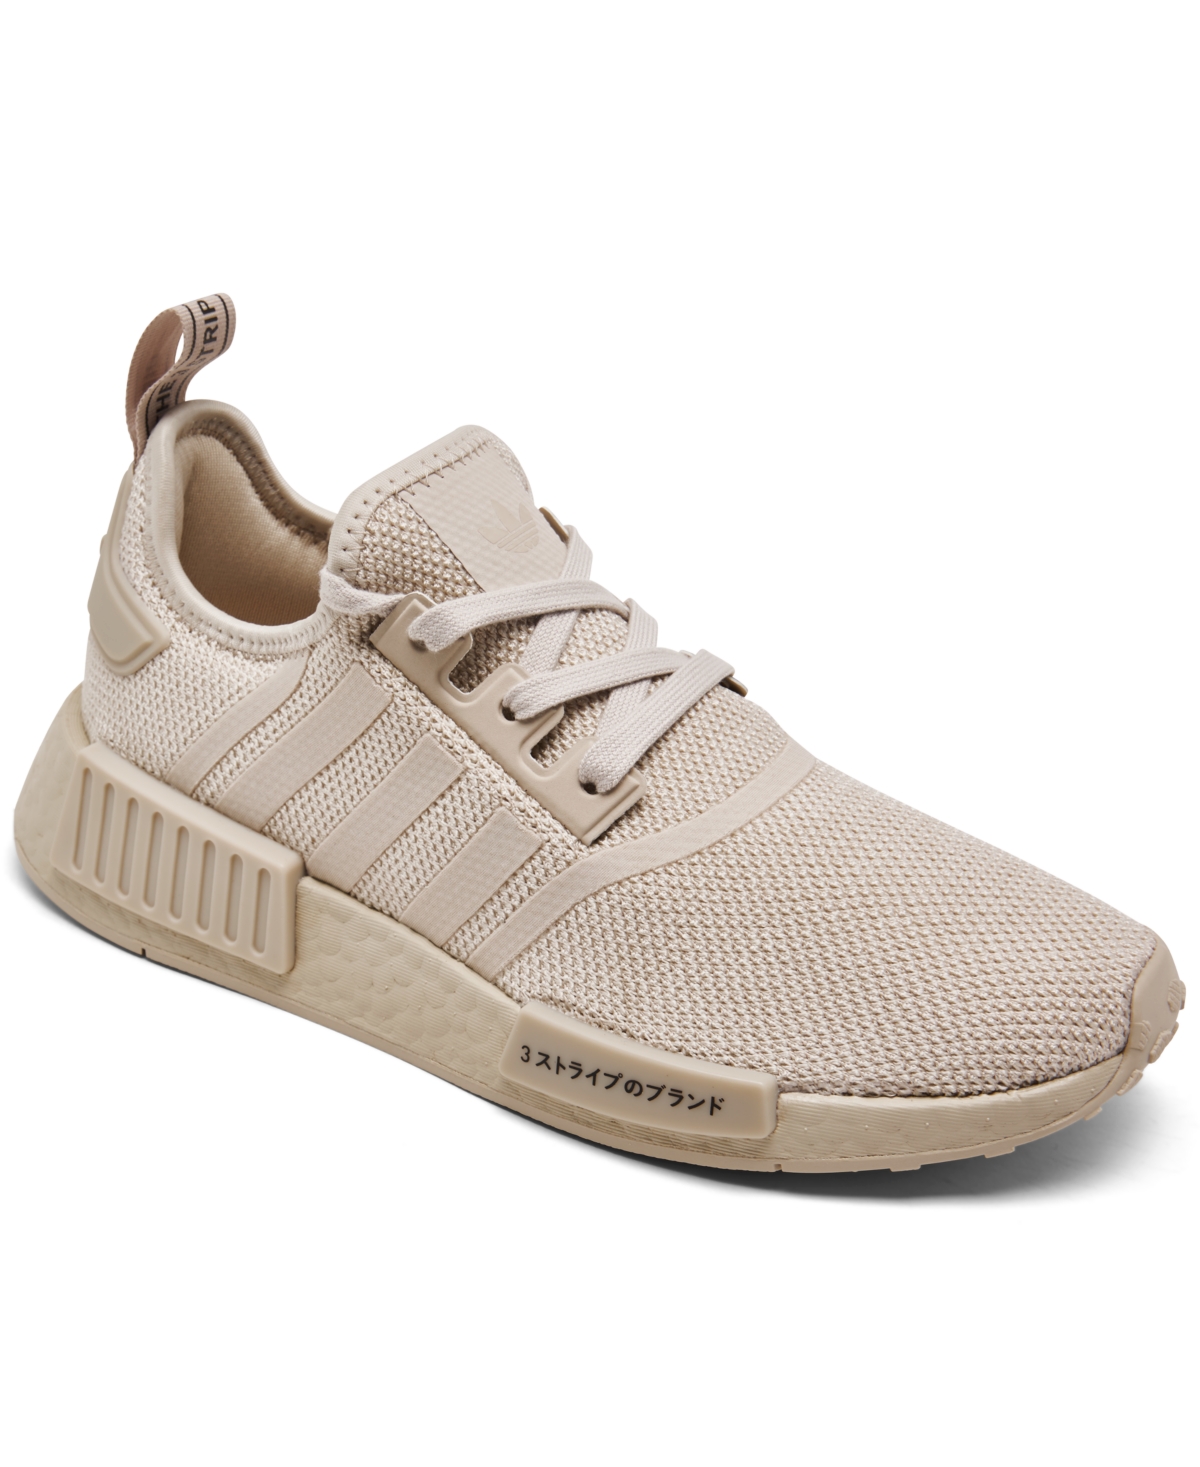 13895364 adidas Womens Nmd R1 Casual Sneakers from Finish L sku 13895364